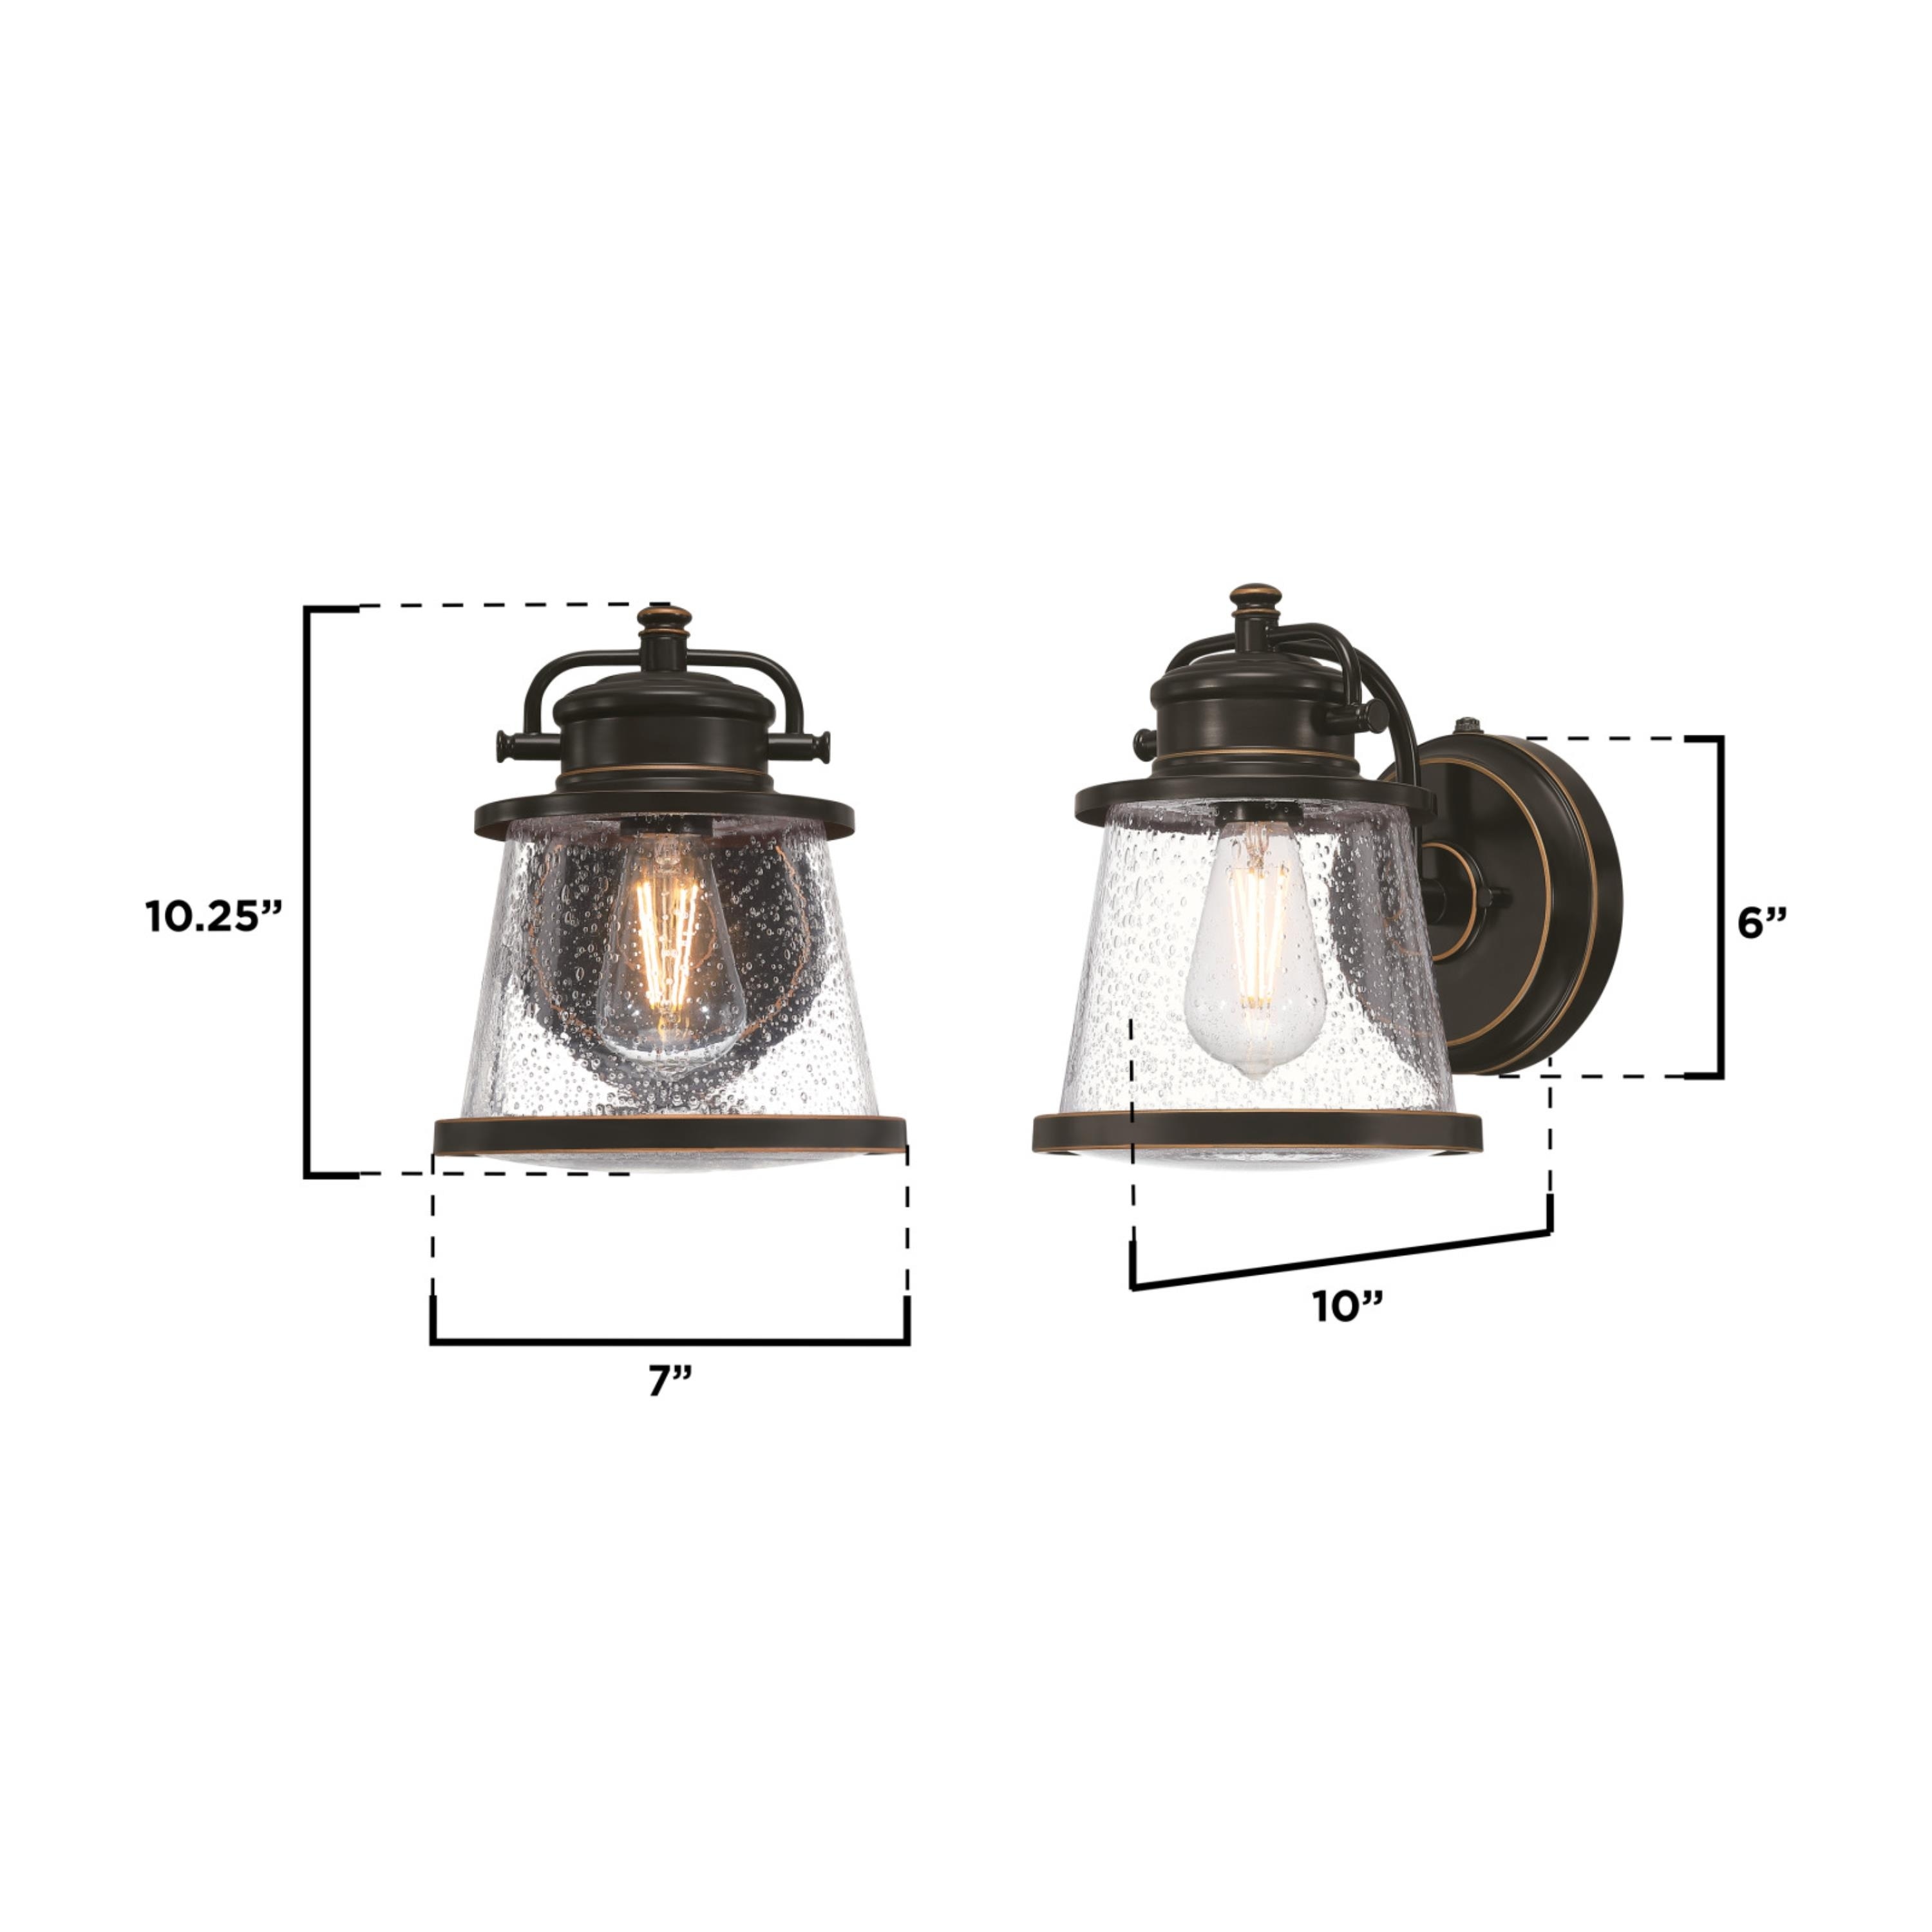 Westinghouse Westinghouse Lighting 6121500 Emma Jane Vintage-Style One Light Outdoor Wall Fixture with Dusk to Dawn Sensor, Amber Bronze Finish, Clear Seeded Glass - image 4 of 5